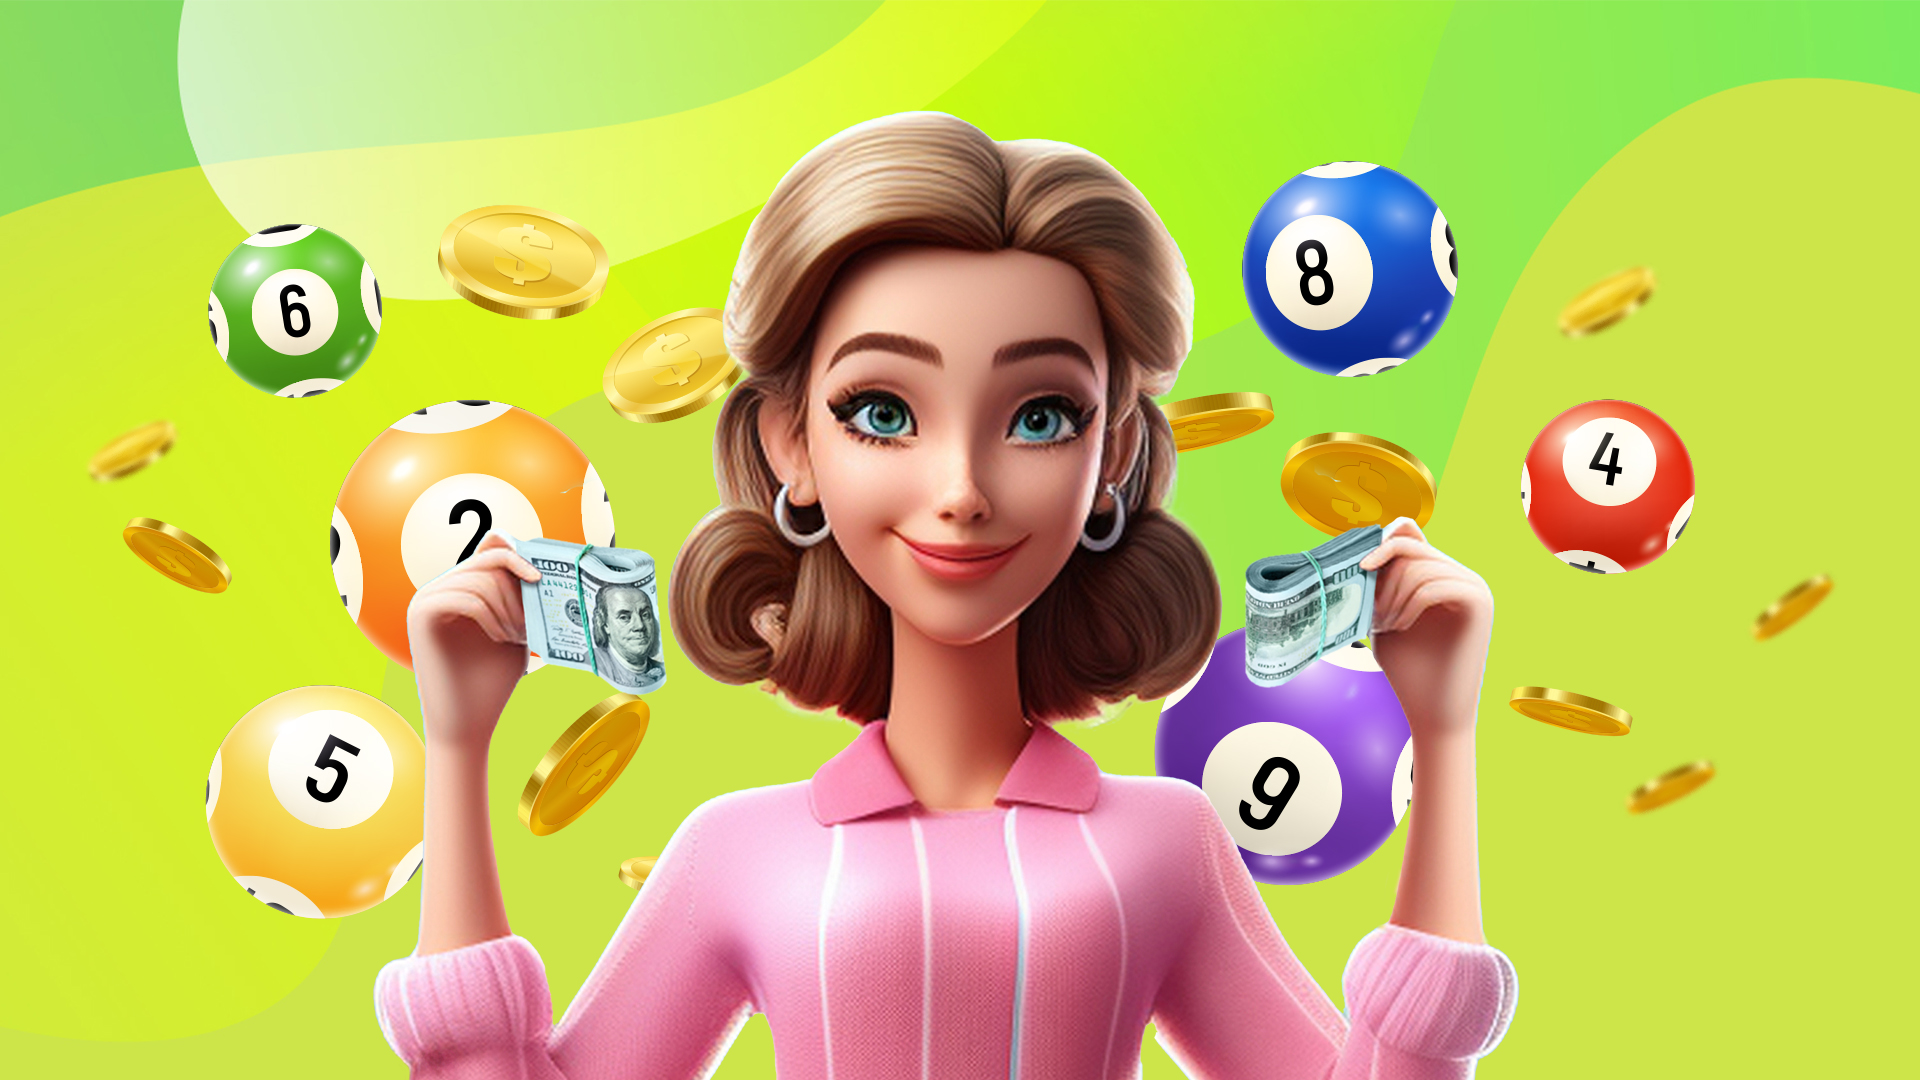 A Cartoon woman surrounded by bingo balls and coins set against a lime green background.